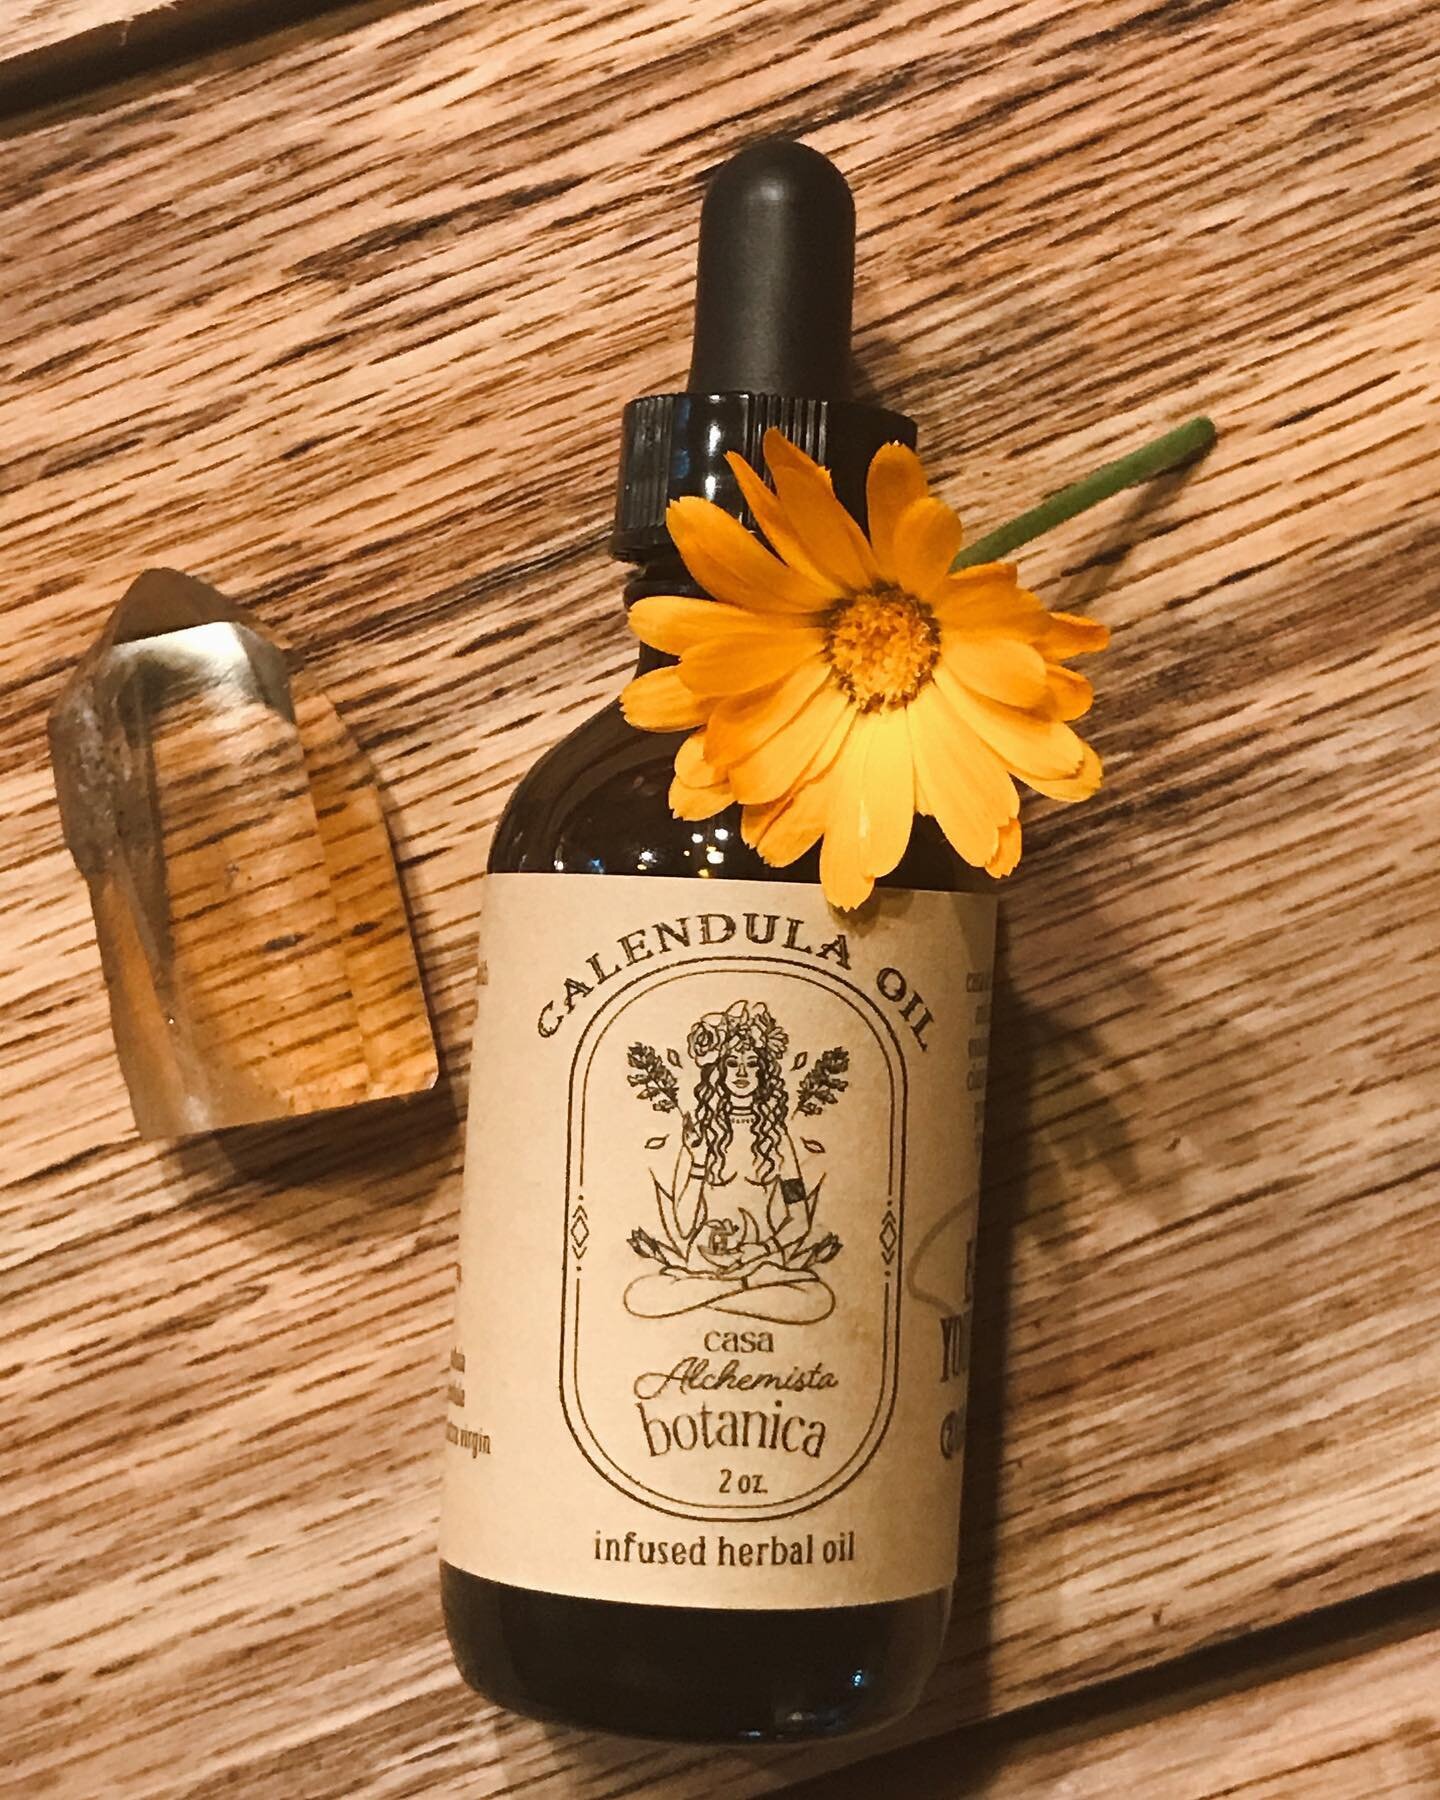 🌼 C͙A͙L͙E͙N͙D͙U͙L͙A͙ 🌼 is a bright, happy yellow-orange flower and favorite in the world of herbalism for its skin healing properties and ability to act as an all purpose medicine for many skin conditions.
🌼
I love to use Calendula oil as a daily/